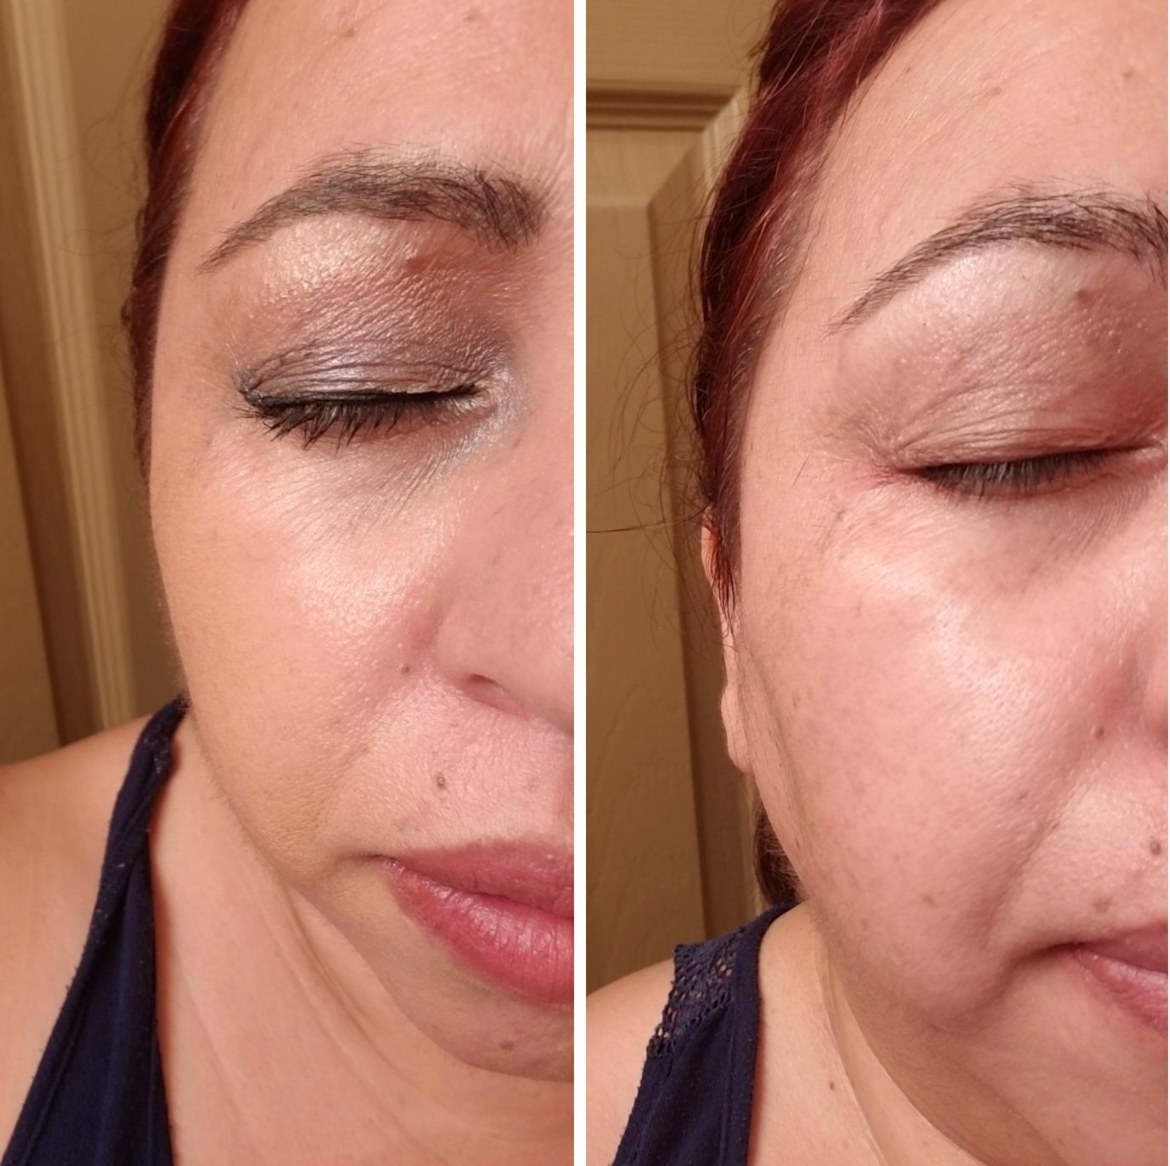 the before and after of the makeup wipes